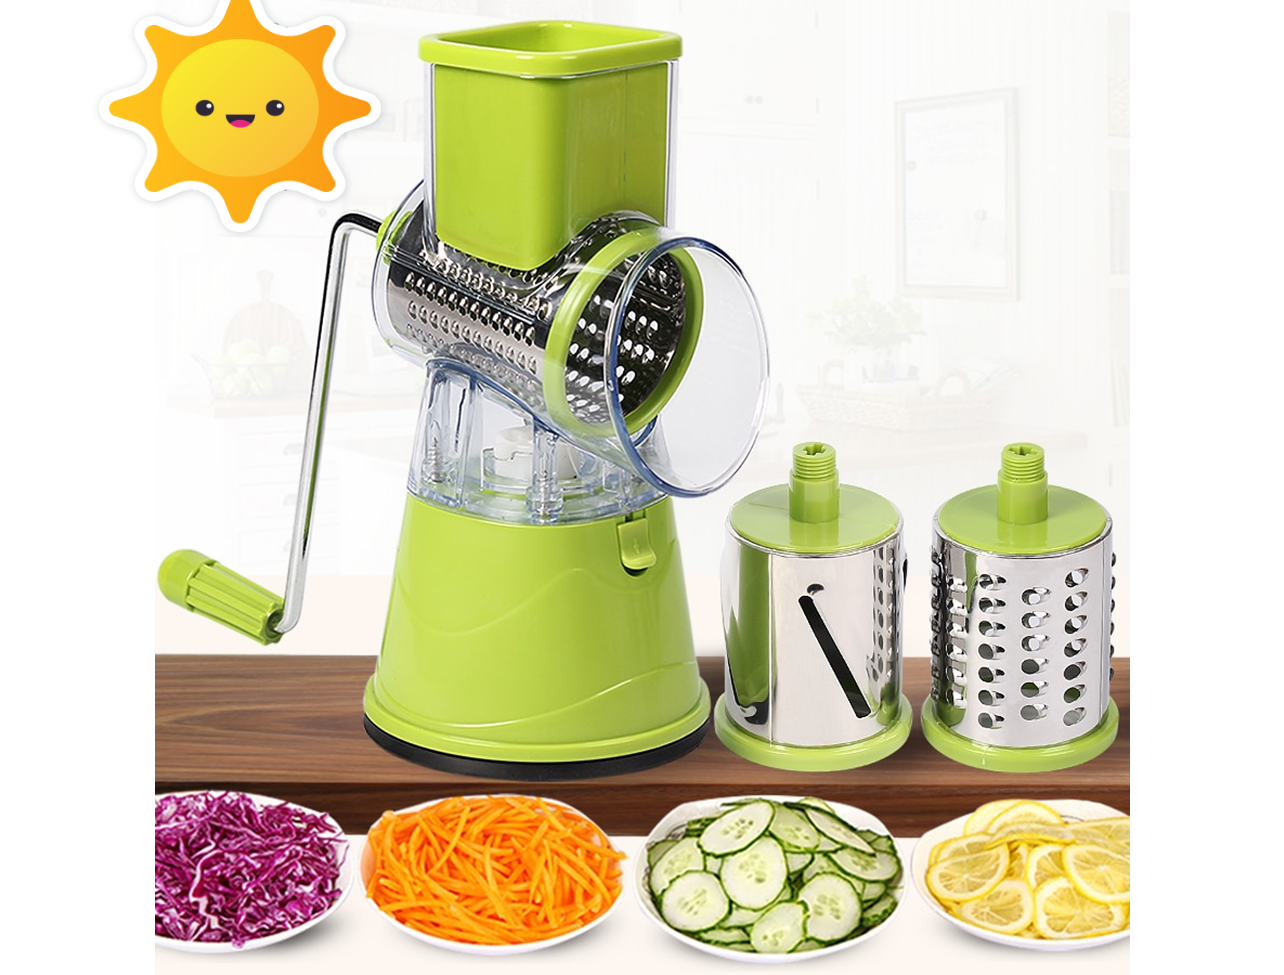 3 in 1 Multifunctional Stainless Steel Rotary Slicer, Cheese Grater, Vegetable Cutter